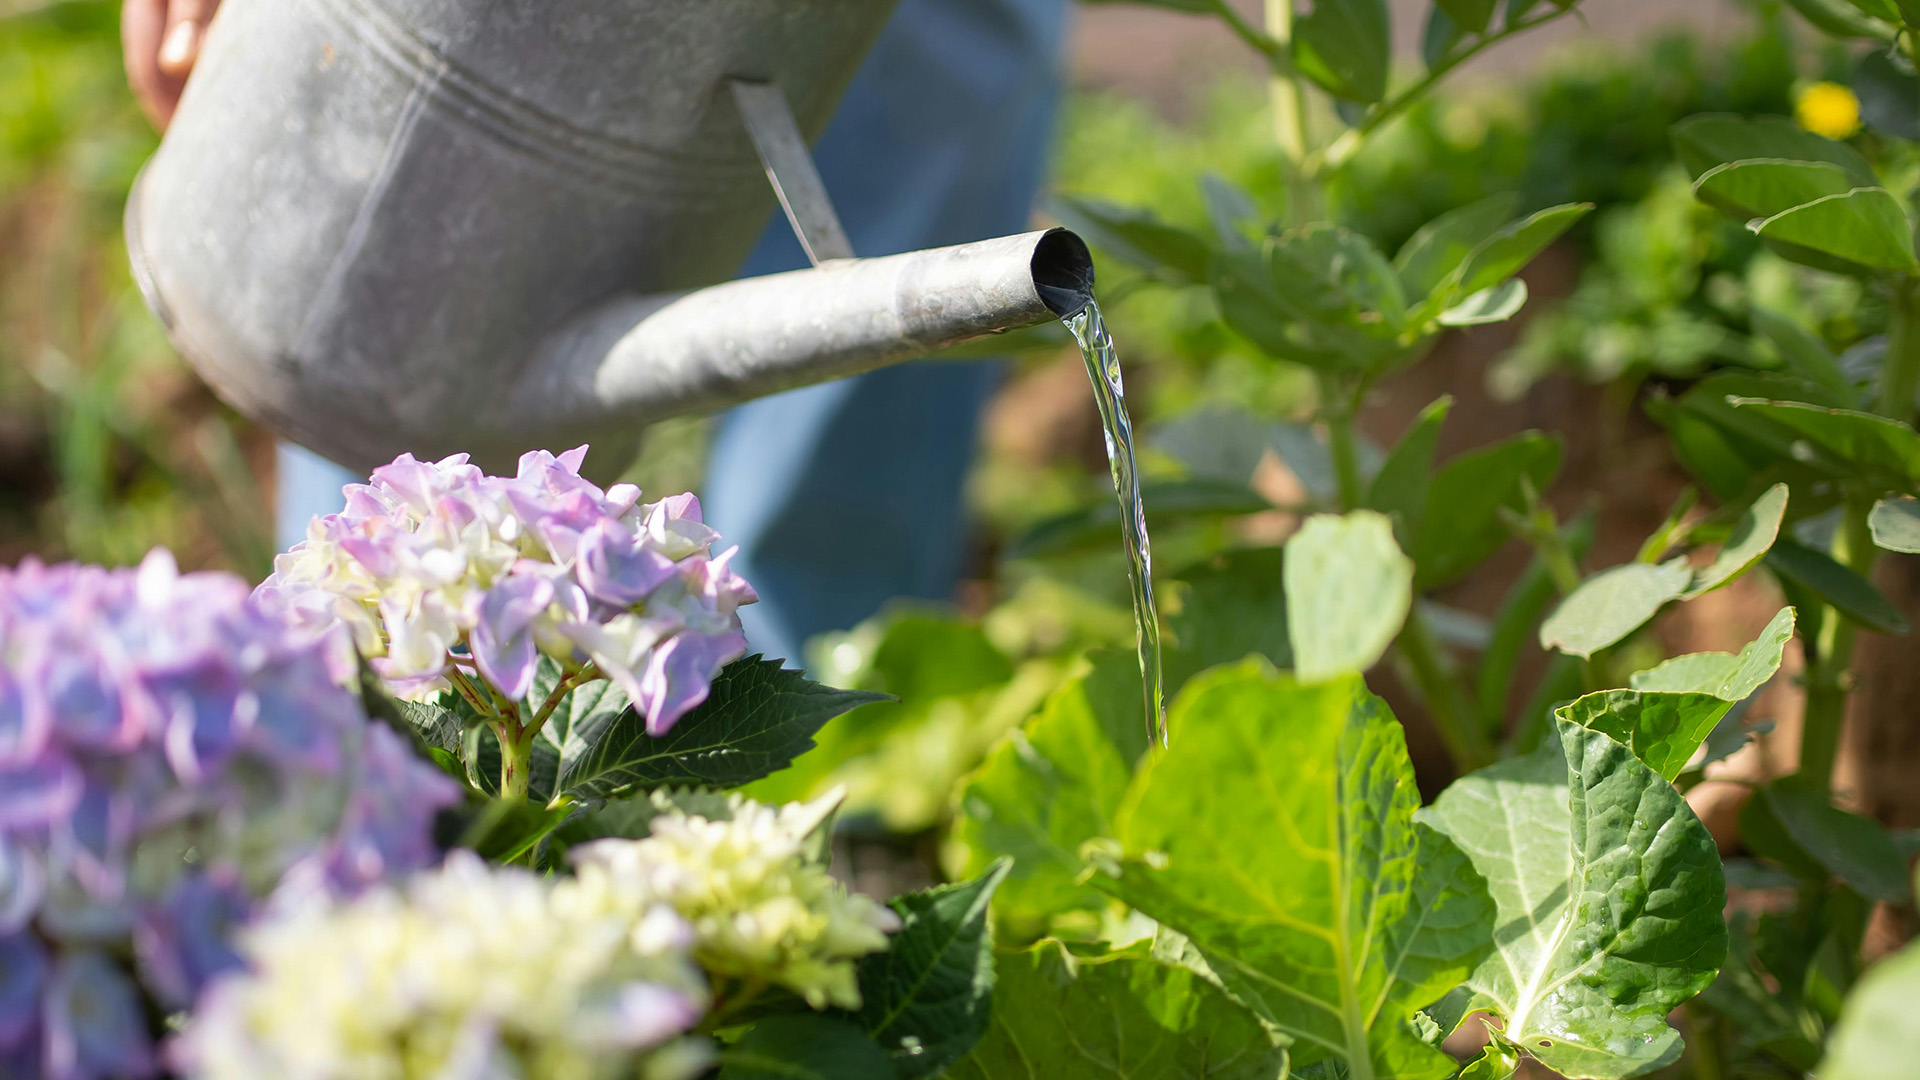 Metal watering can being used to water a garden